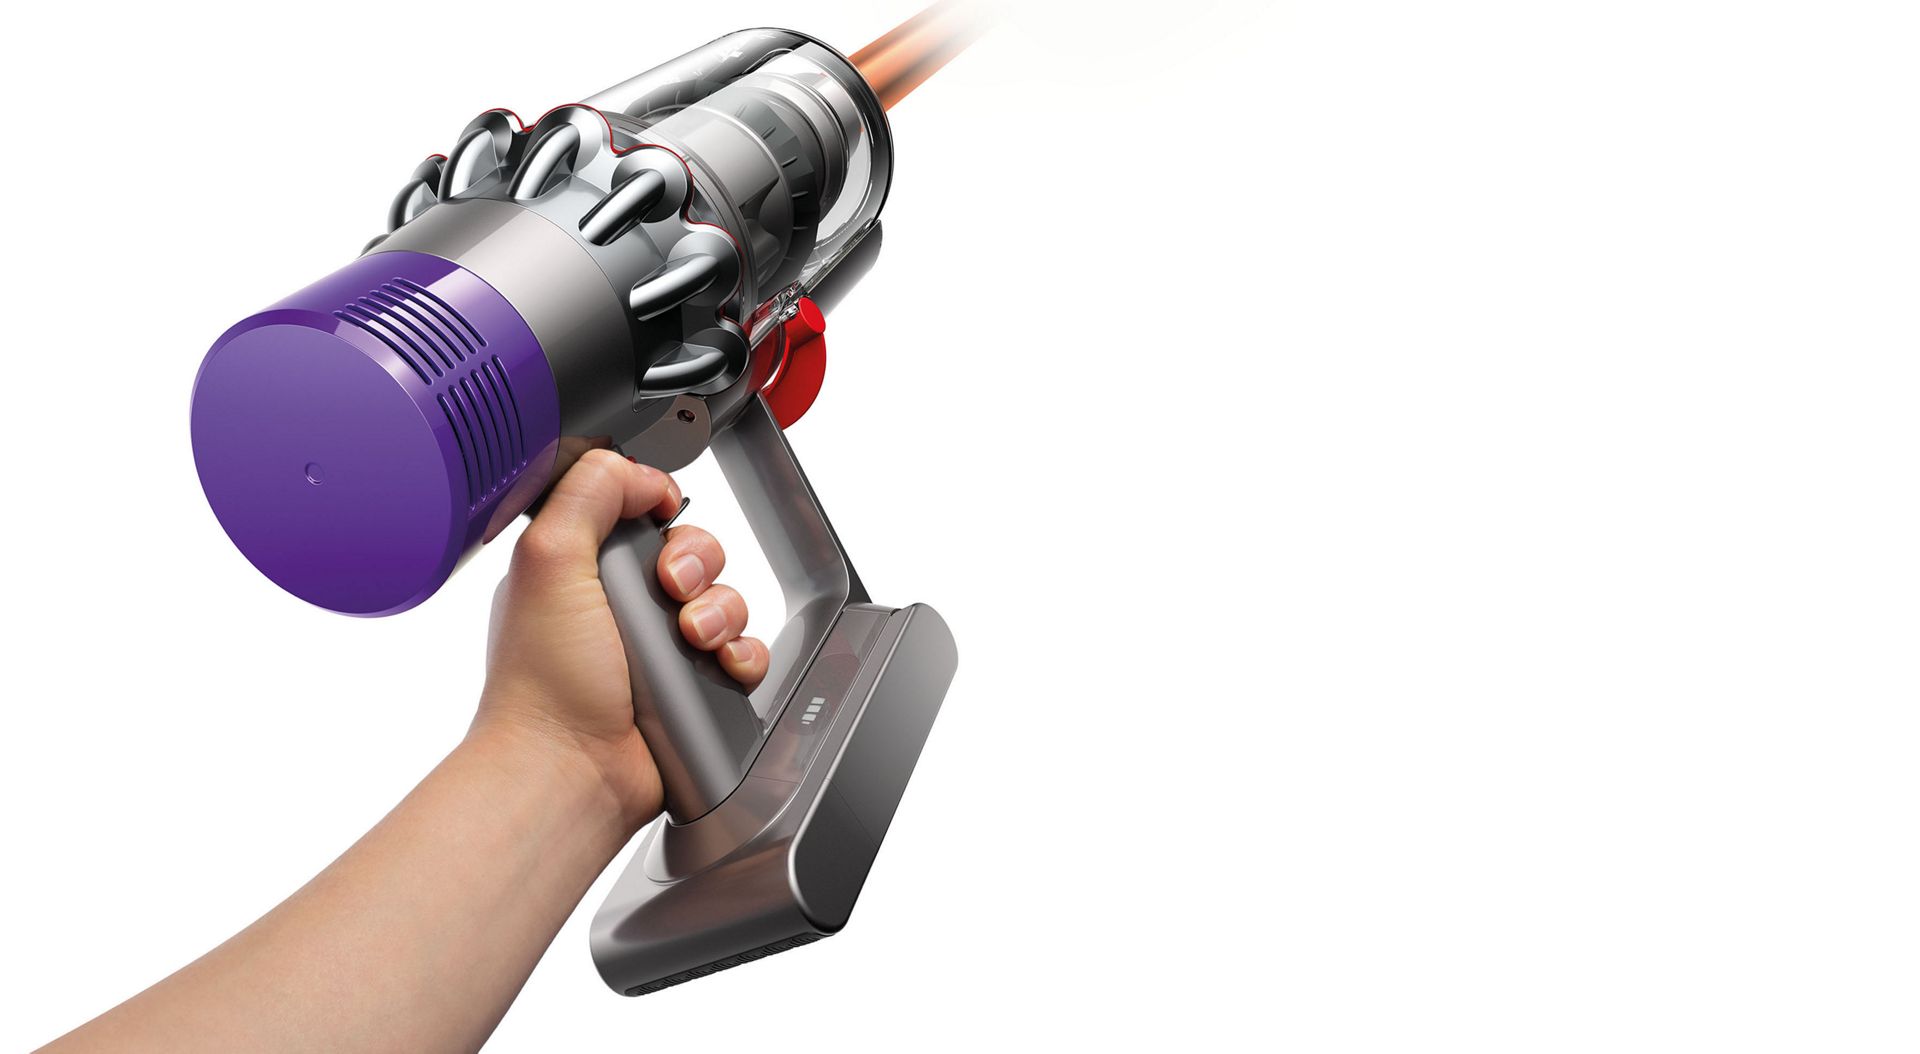 Dyson Cyclone V10™ vacuum cleaner: The engineering story